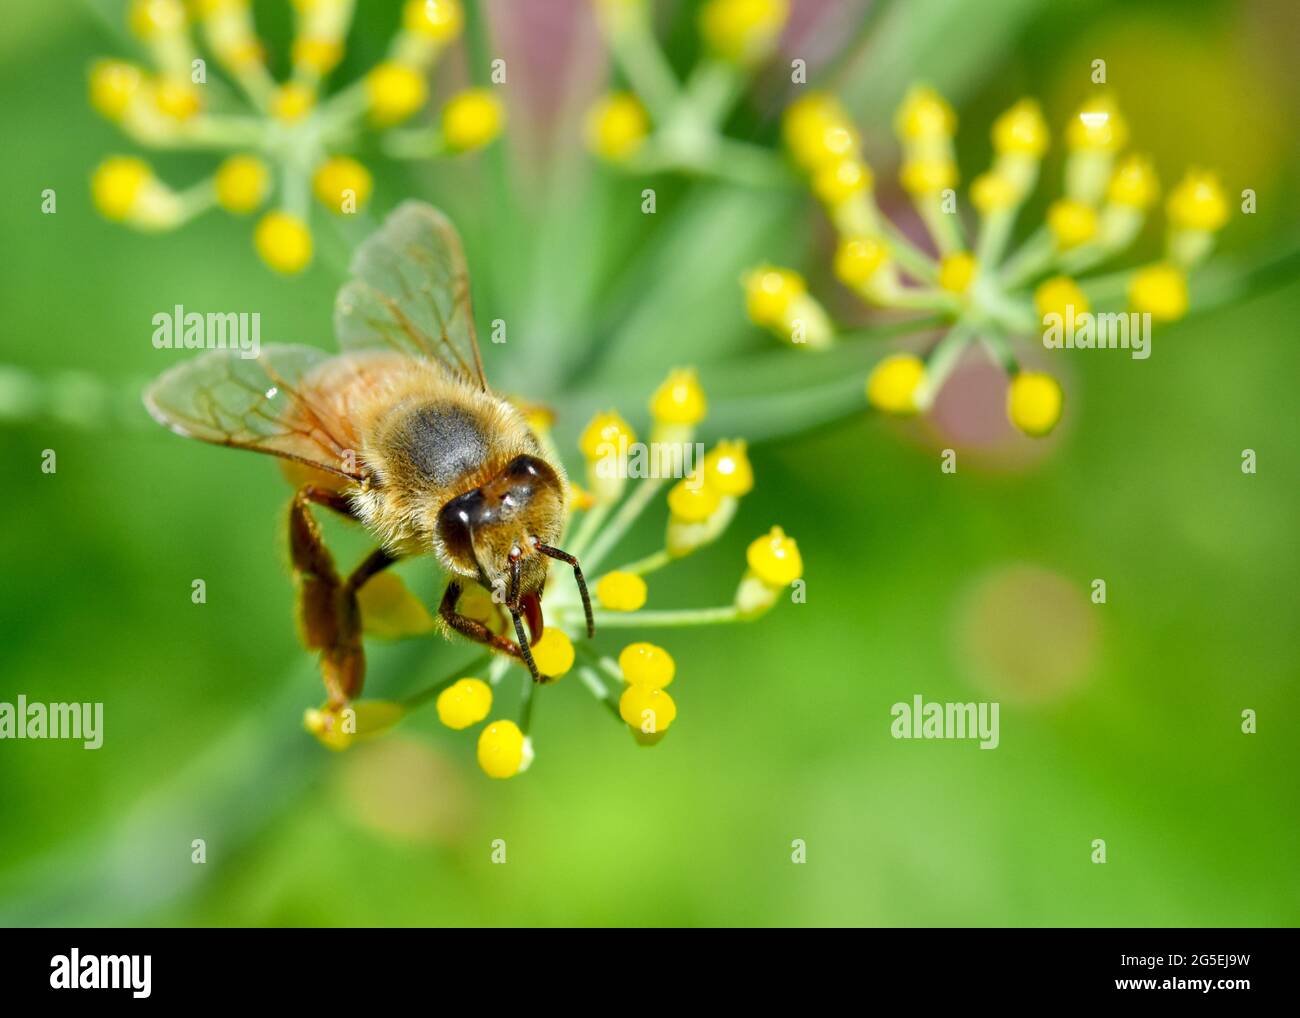 Honey bee (Apis mellifera) gathers nectar from the tiny yellow flowers of fennel (Foeniculum vulgare). Closeup. Copy space. Stock Photo